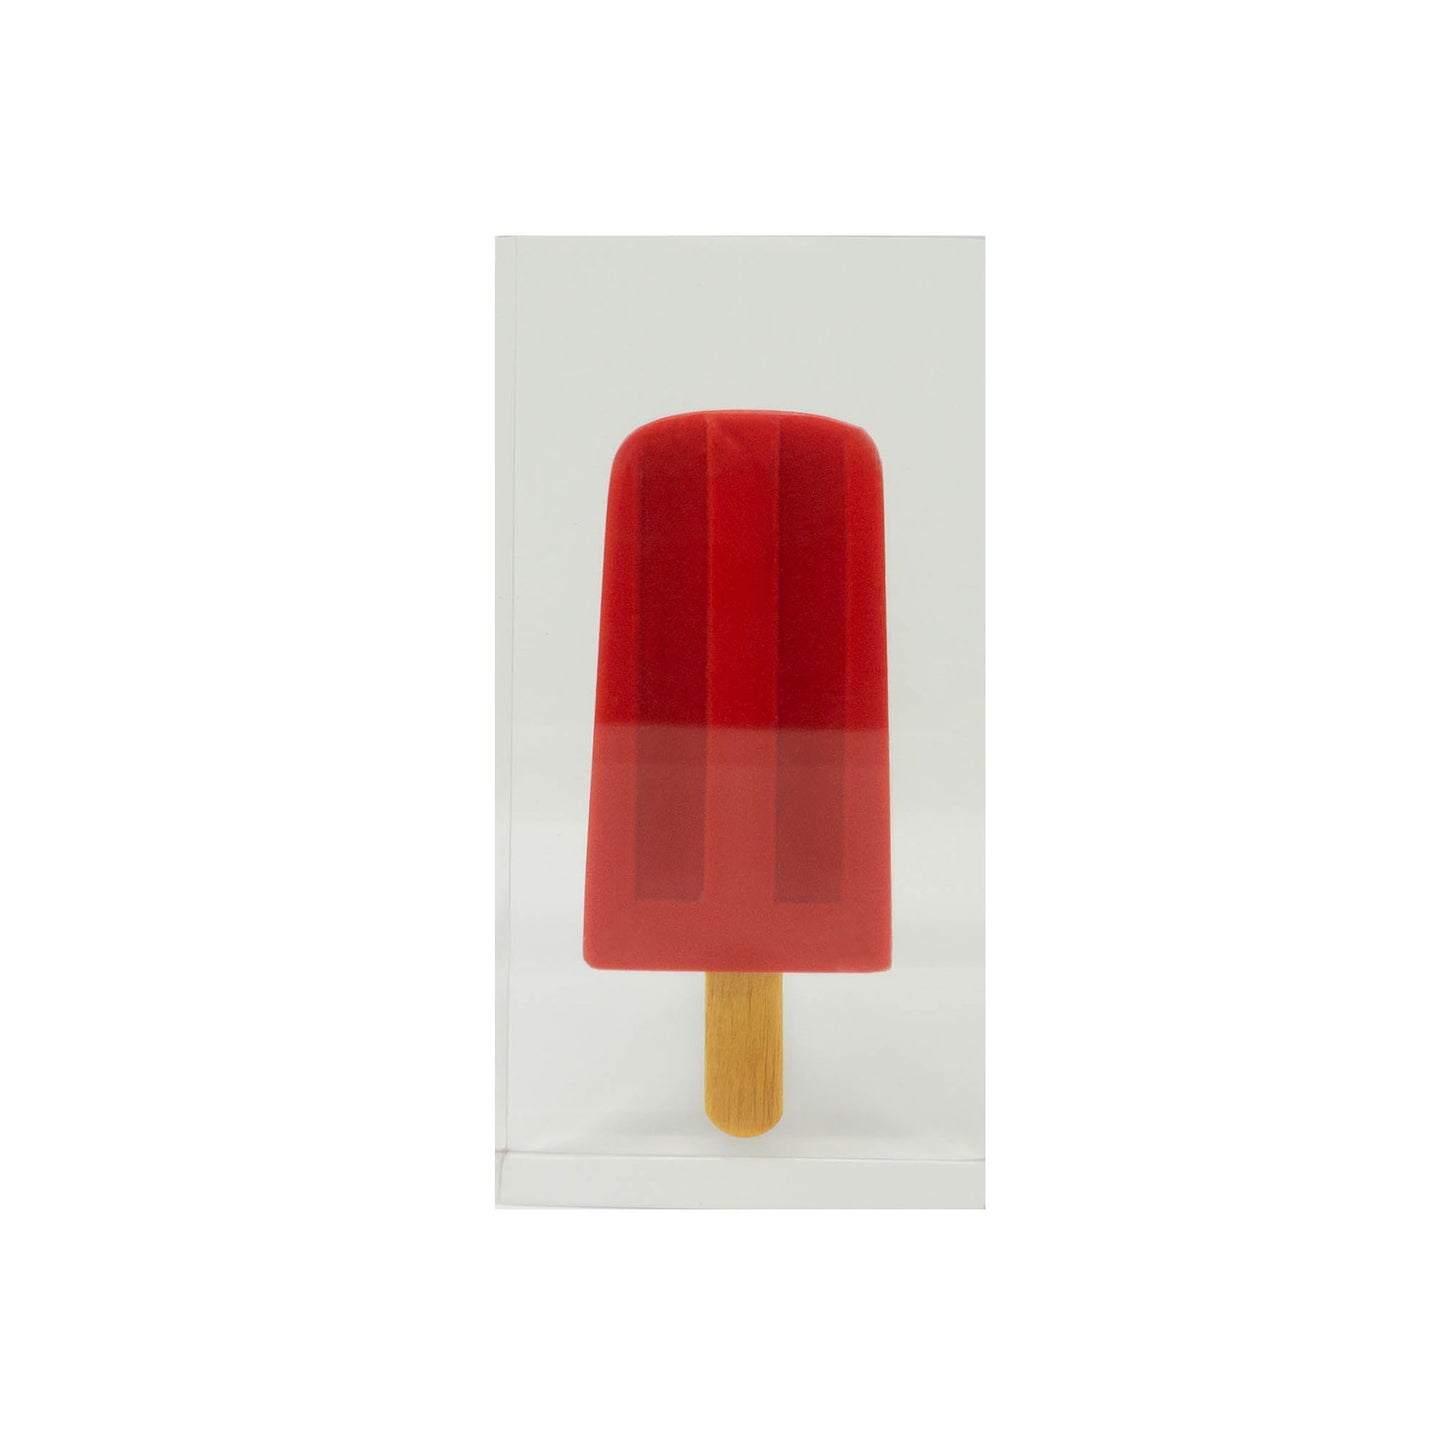 CHERRY BOMB RED FLOATING POPSICLE RESIN SCULPTURE